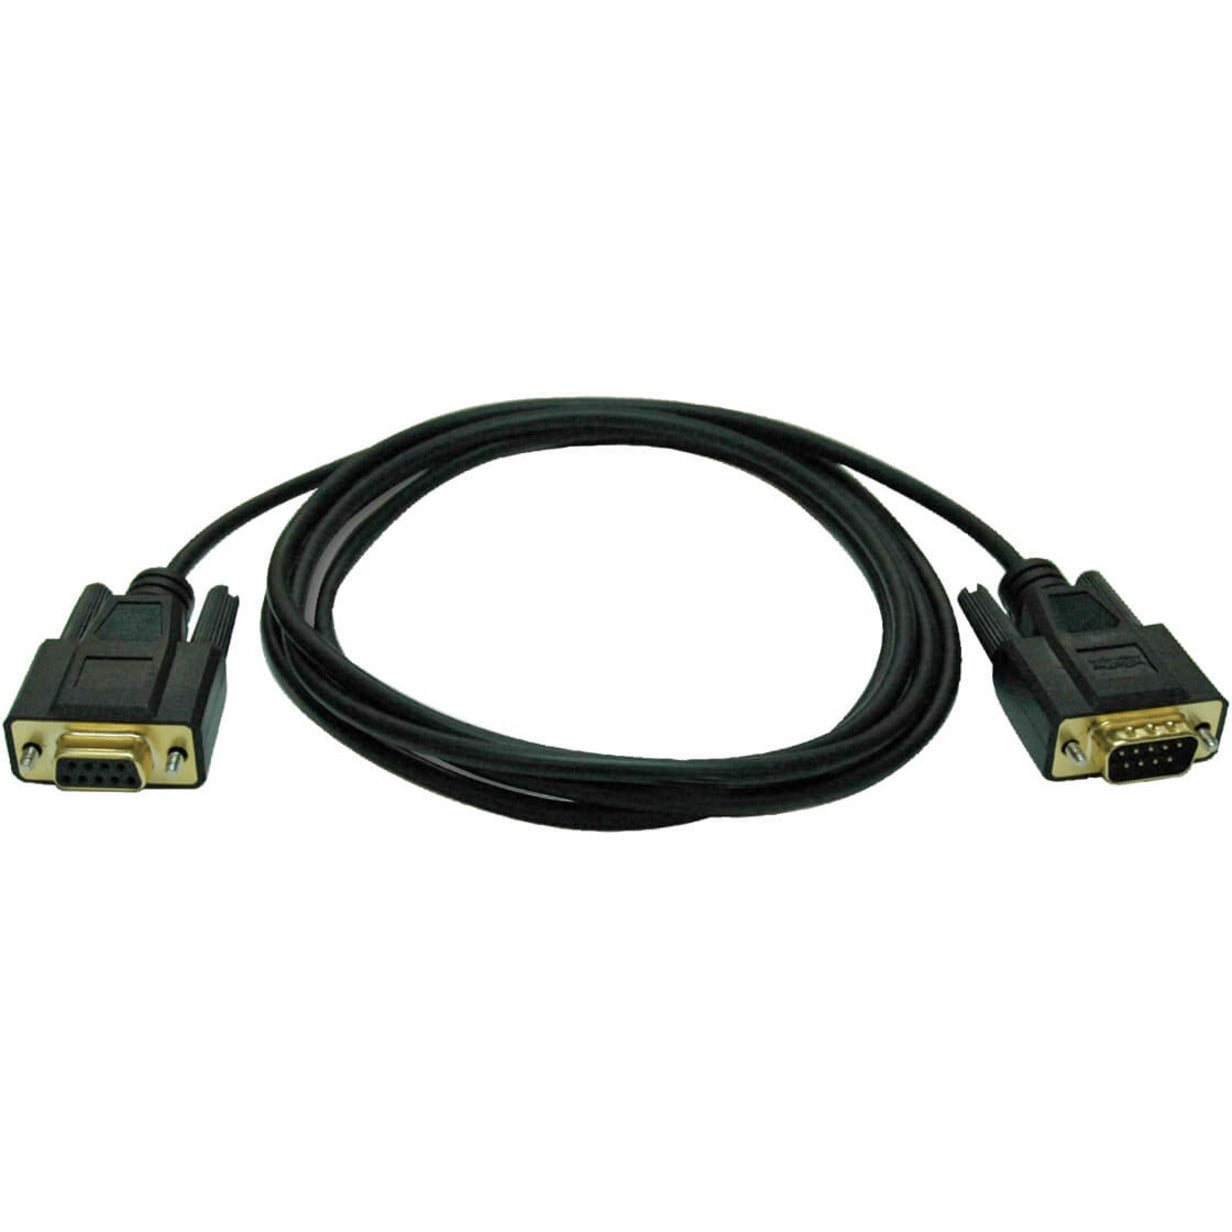 Tripp Lite P454-006 Null Modem Cable, 6 ft, Data Transfer Cable